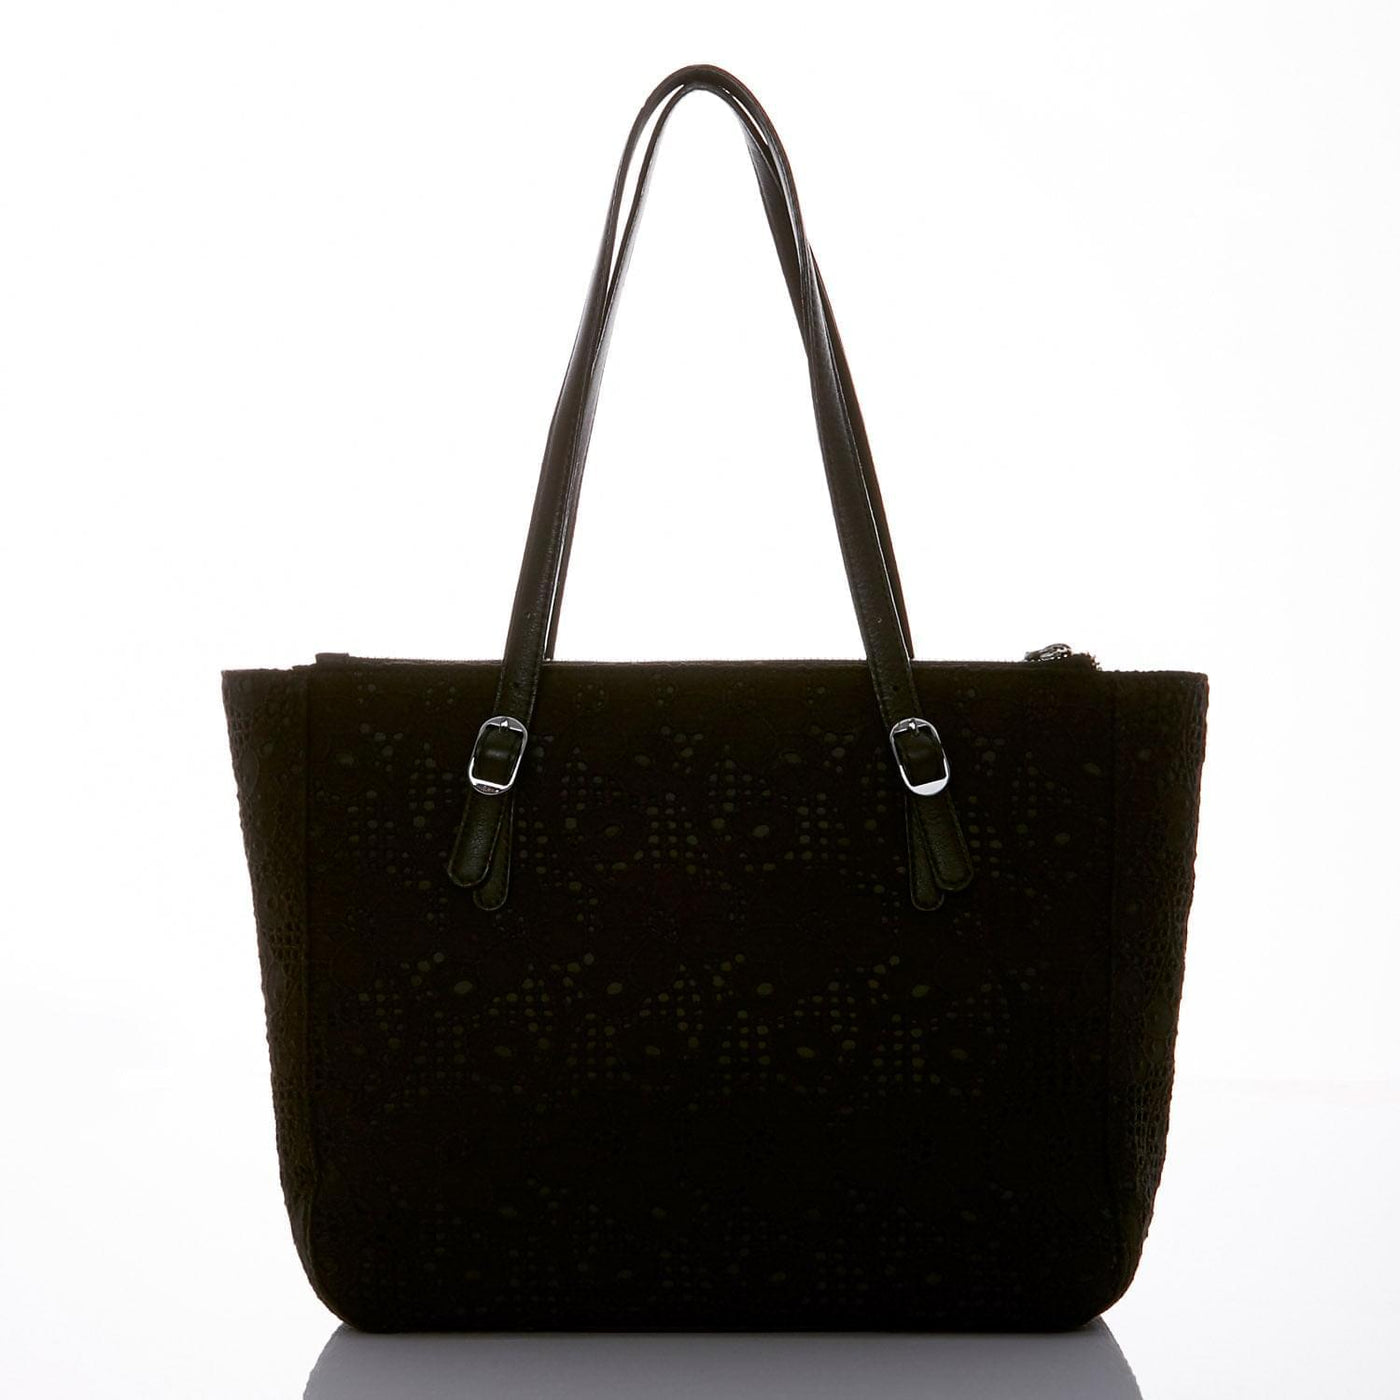 bComfy Black Tote - Women's tote bag for everyday use